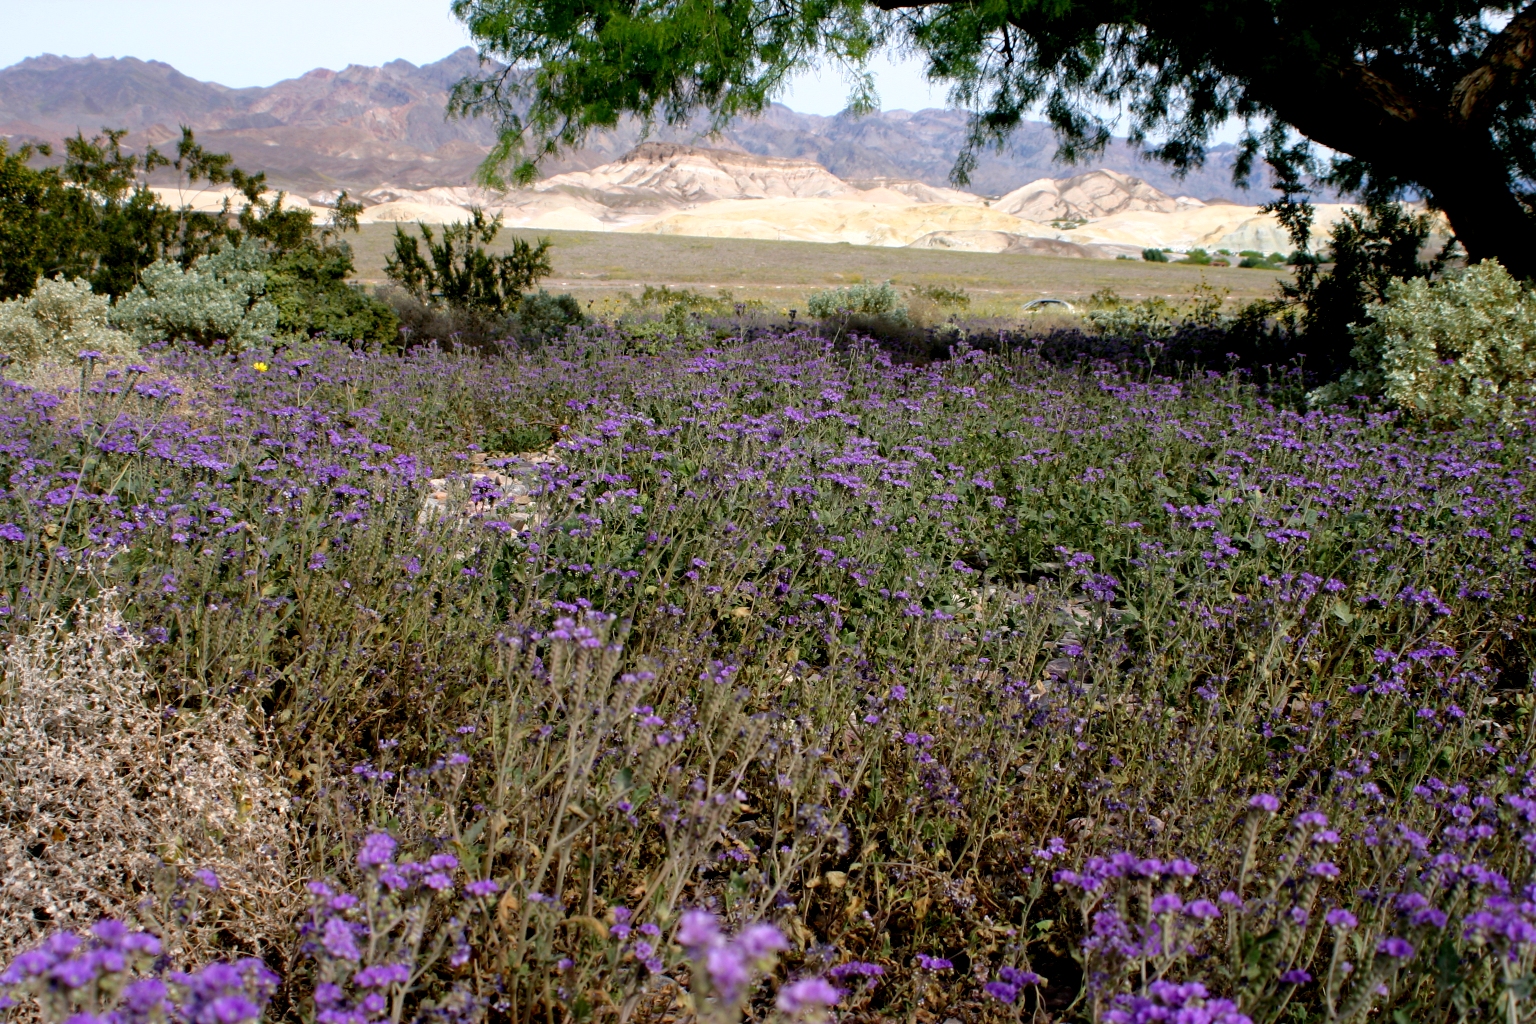 http://upload.wikimedia.org/wikipedia/commons/6/6e/Death_valley_flowers_2.jpg